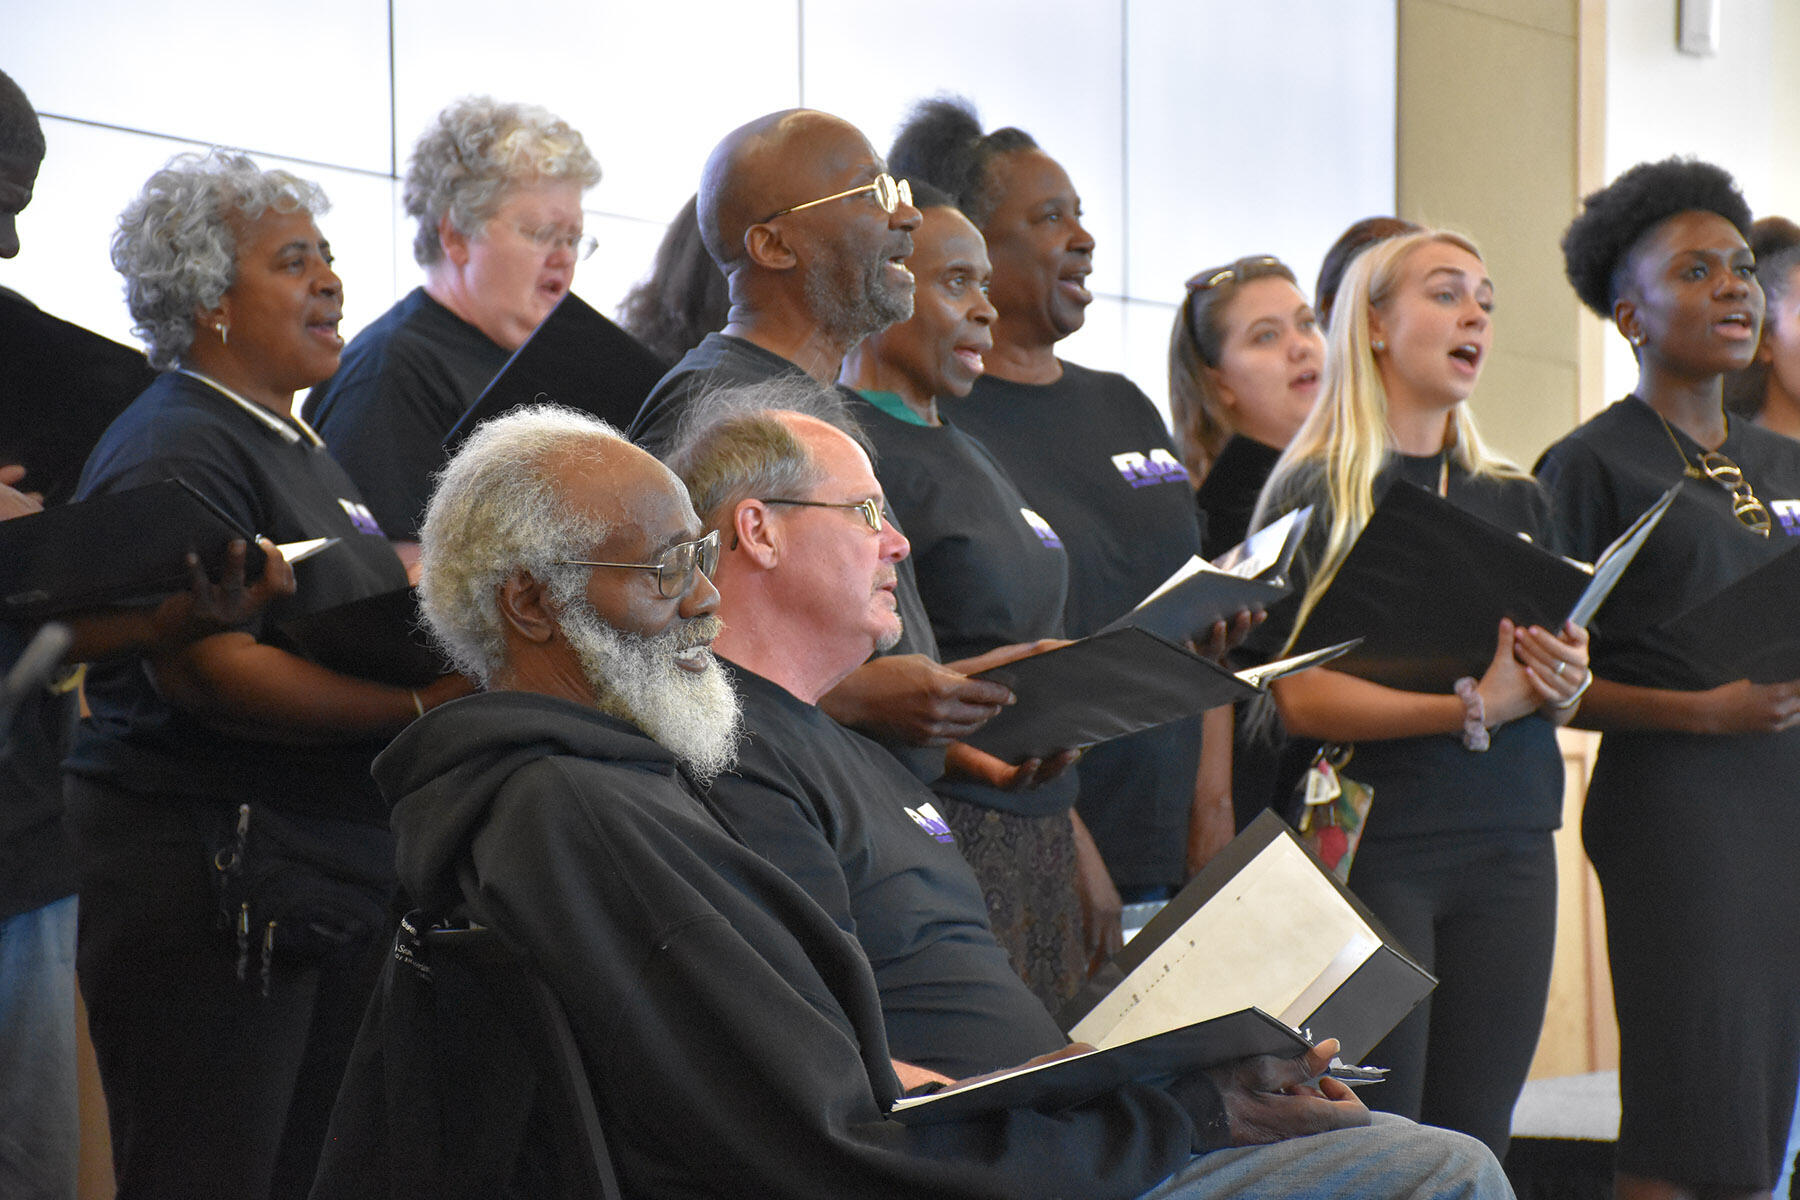 The RVA Street Singers, whose members comprise people affected by homelessness and their allies, performed at the event. The group was among the nominees for outstanding community-university partnerships. (Photo by Adam Caldwell/Division of Community Engagement)